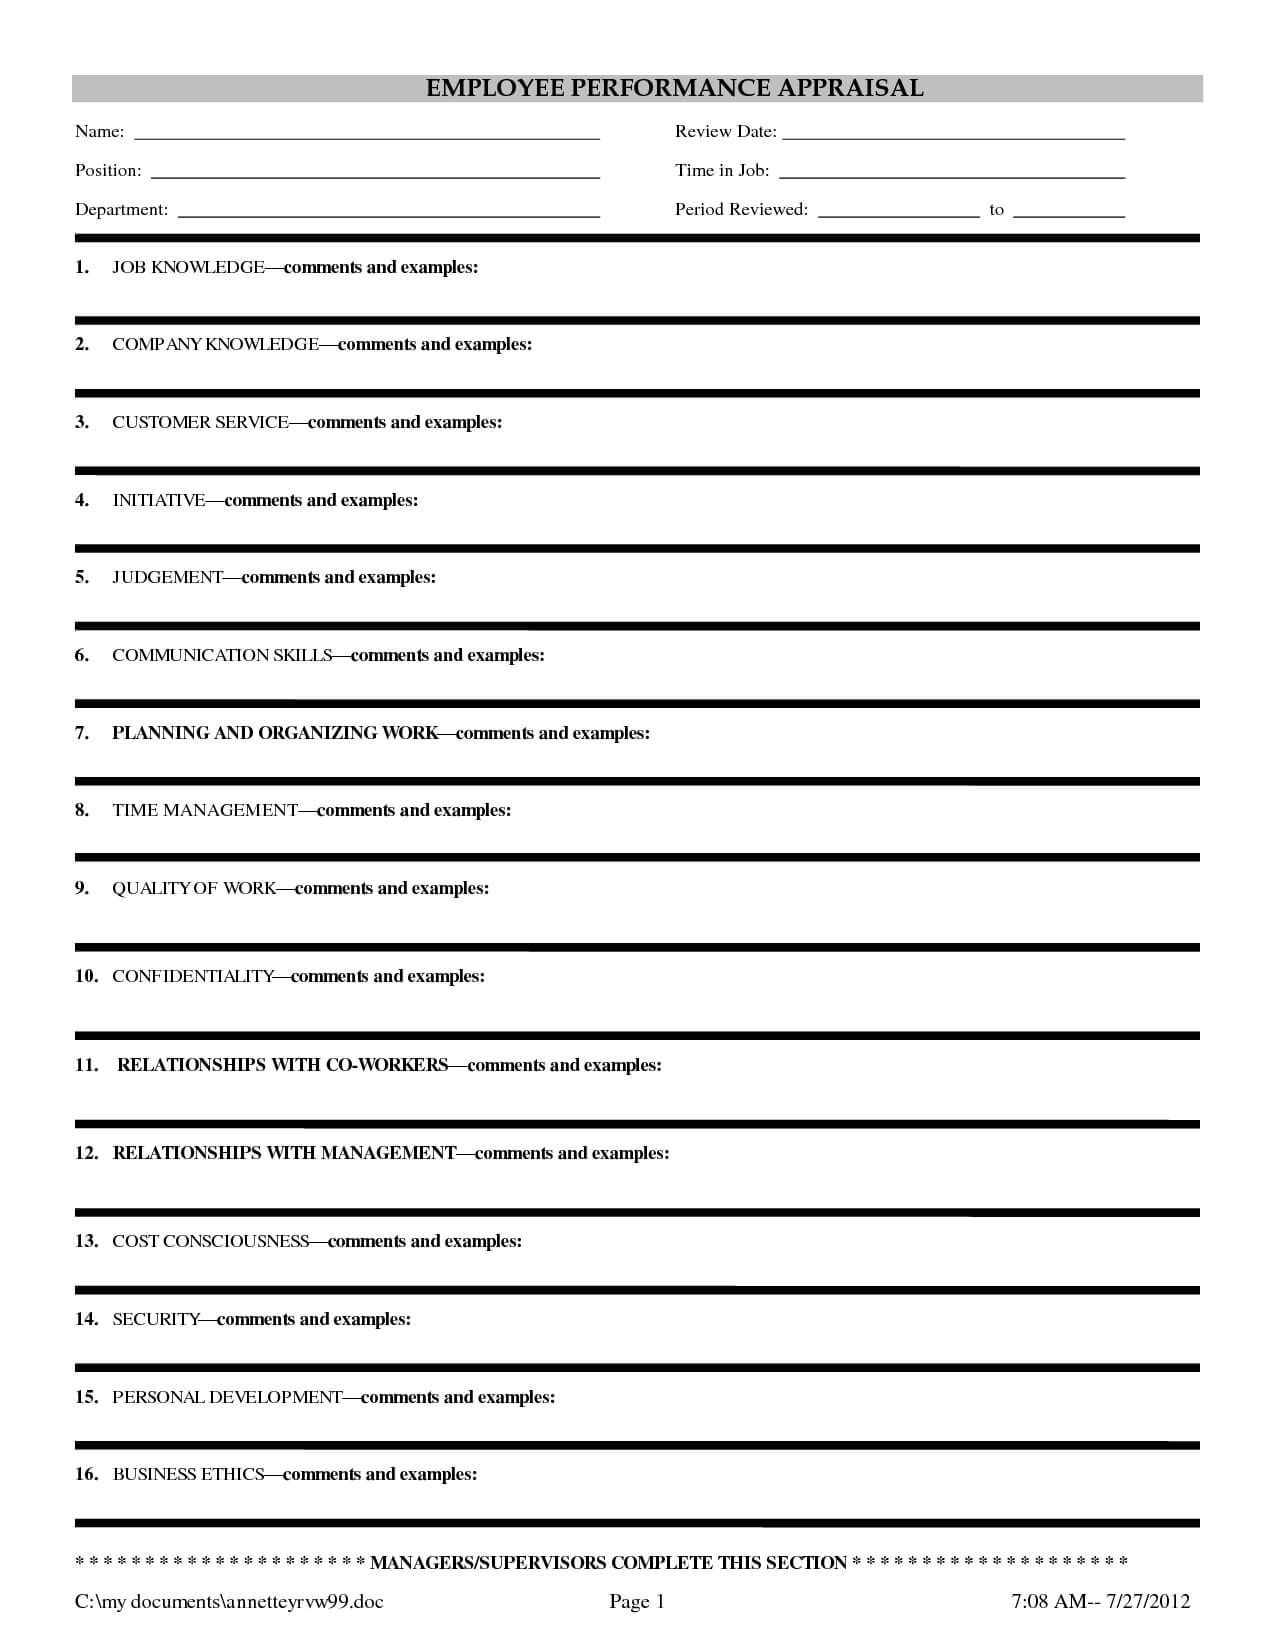 23 Images Of Evaluation Outline Template Blank | Masorler With Blank Evaluation Form Template